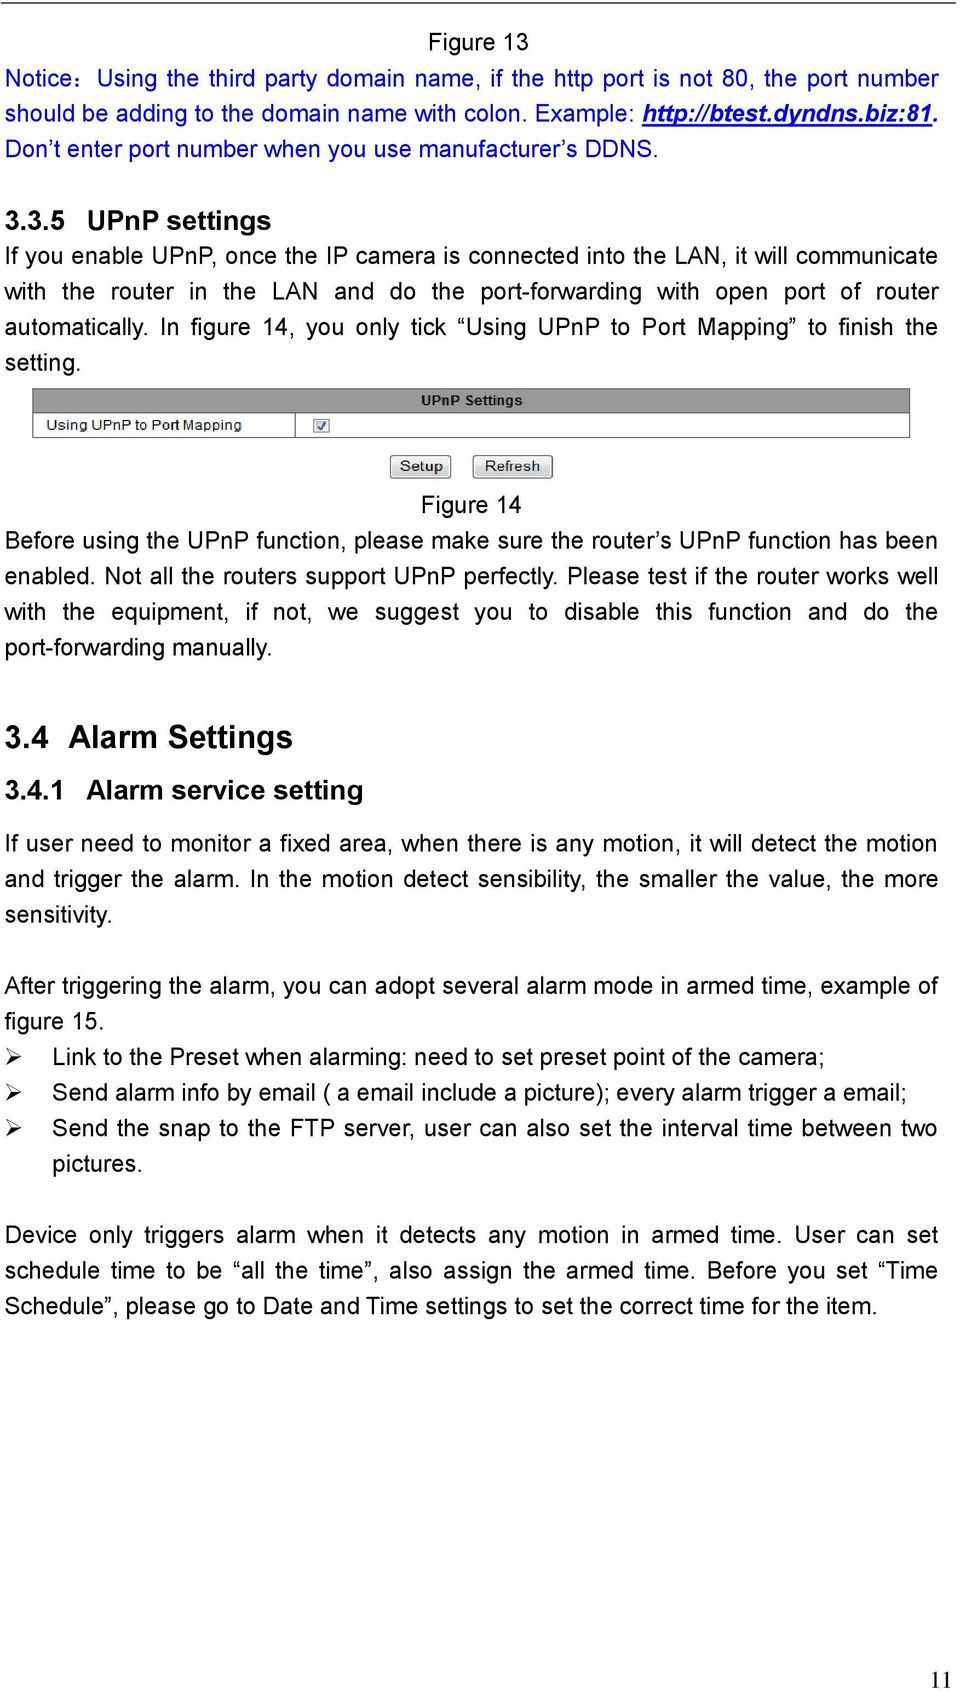 3.5 UPnP settings If you enable UPnP, once the IP camera is connected into the LAN, it will communicate with the router in the LAN and do the port-forwarding with open port of router automatically.